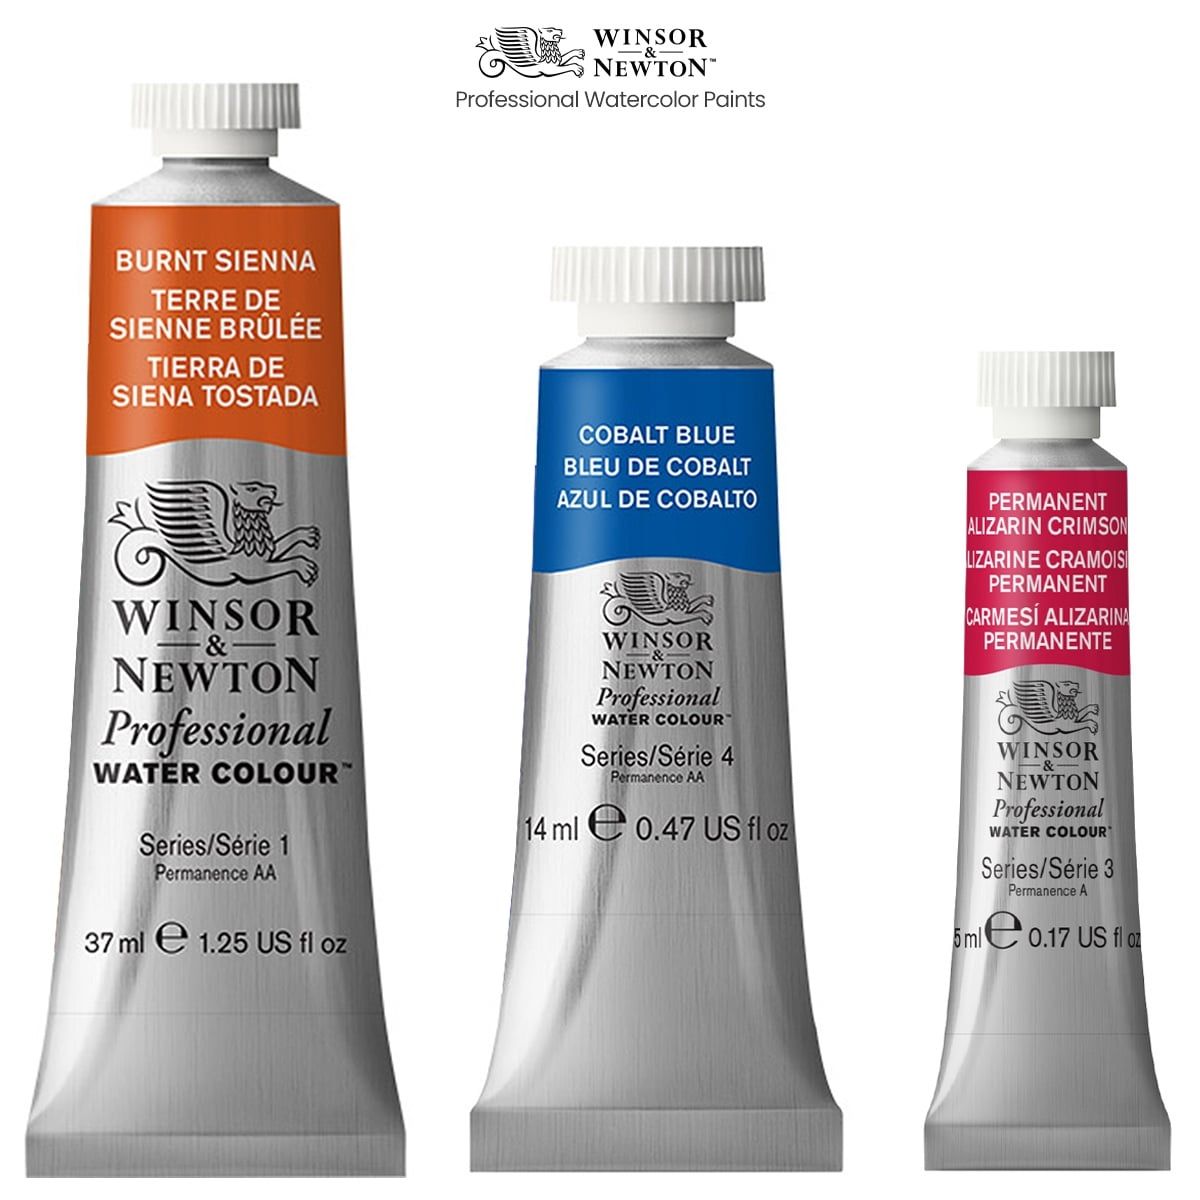 Winsor & Newton Professional Watercolor - Chinese White 5 ml